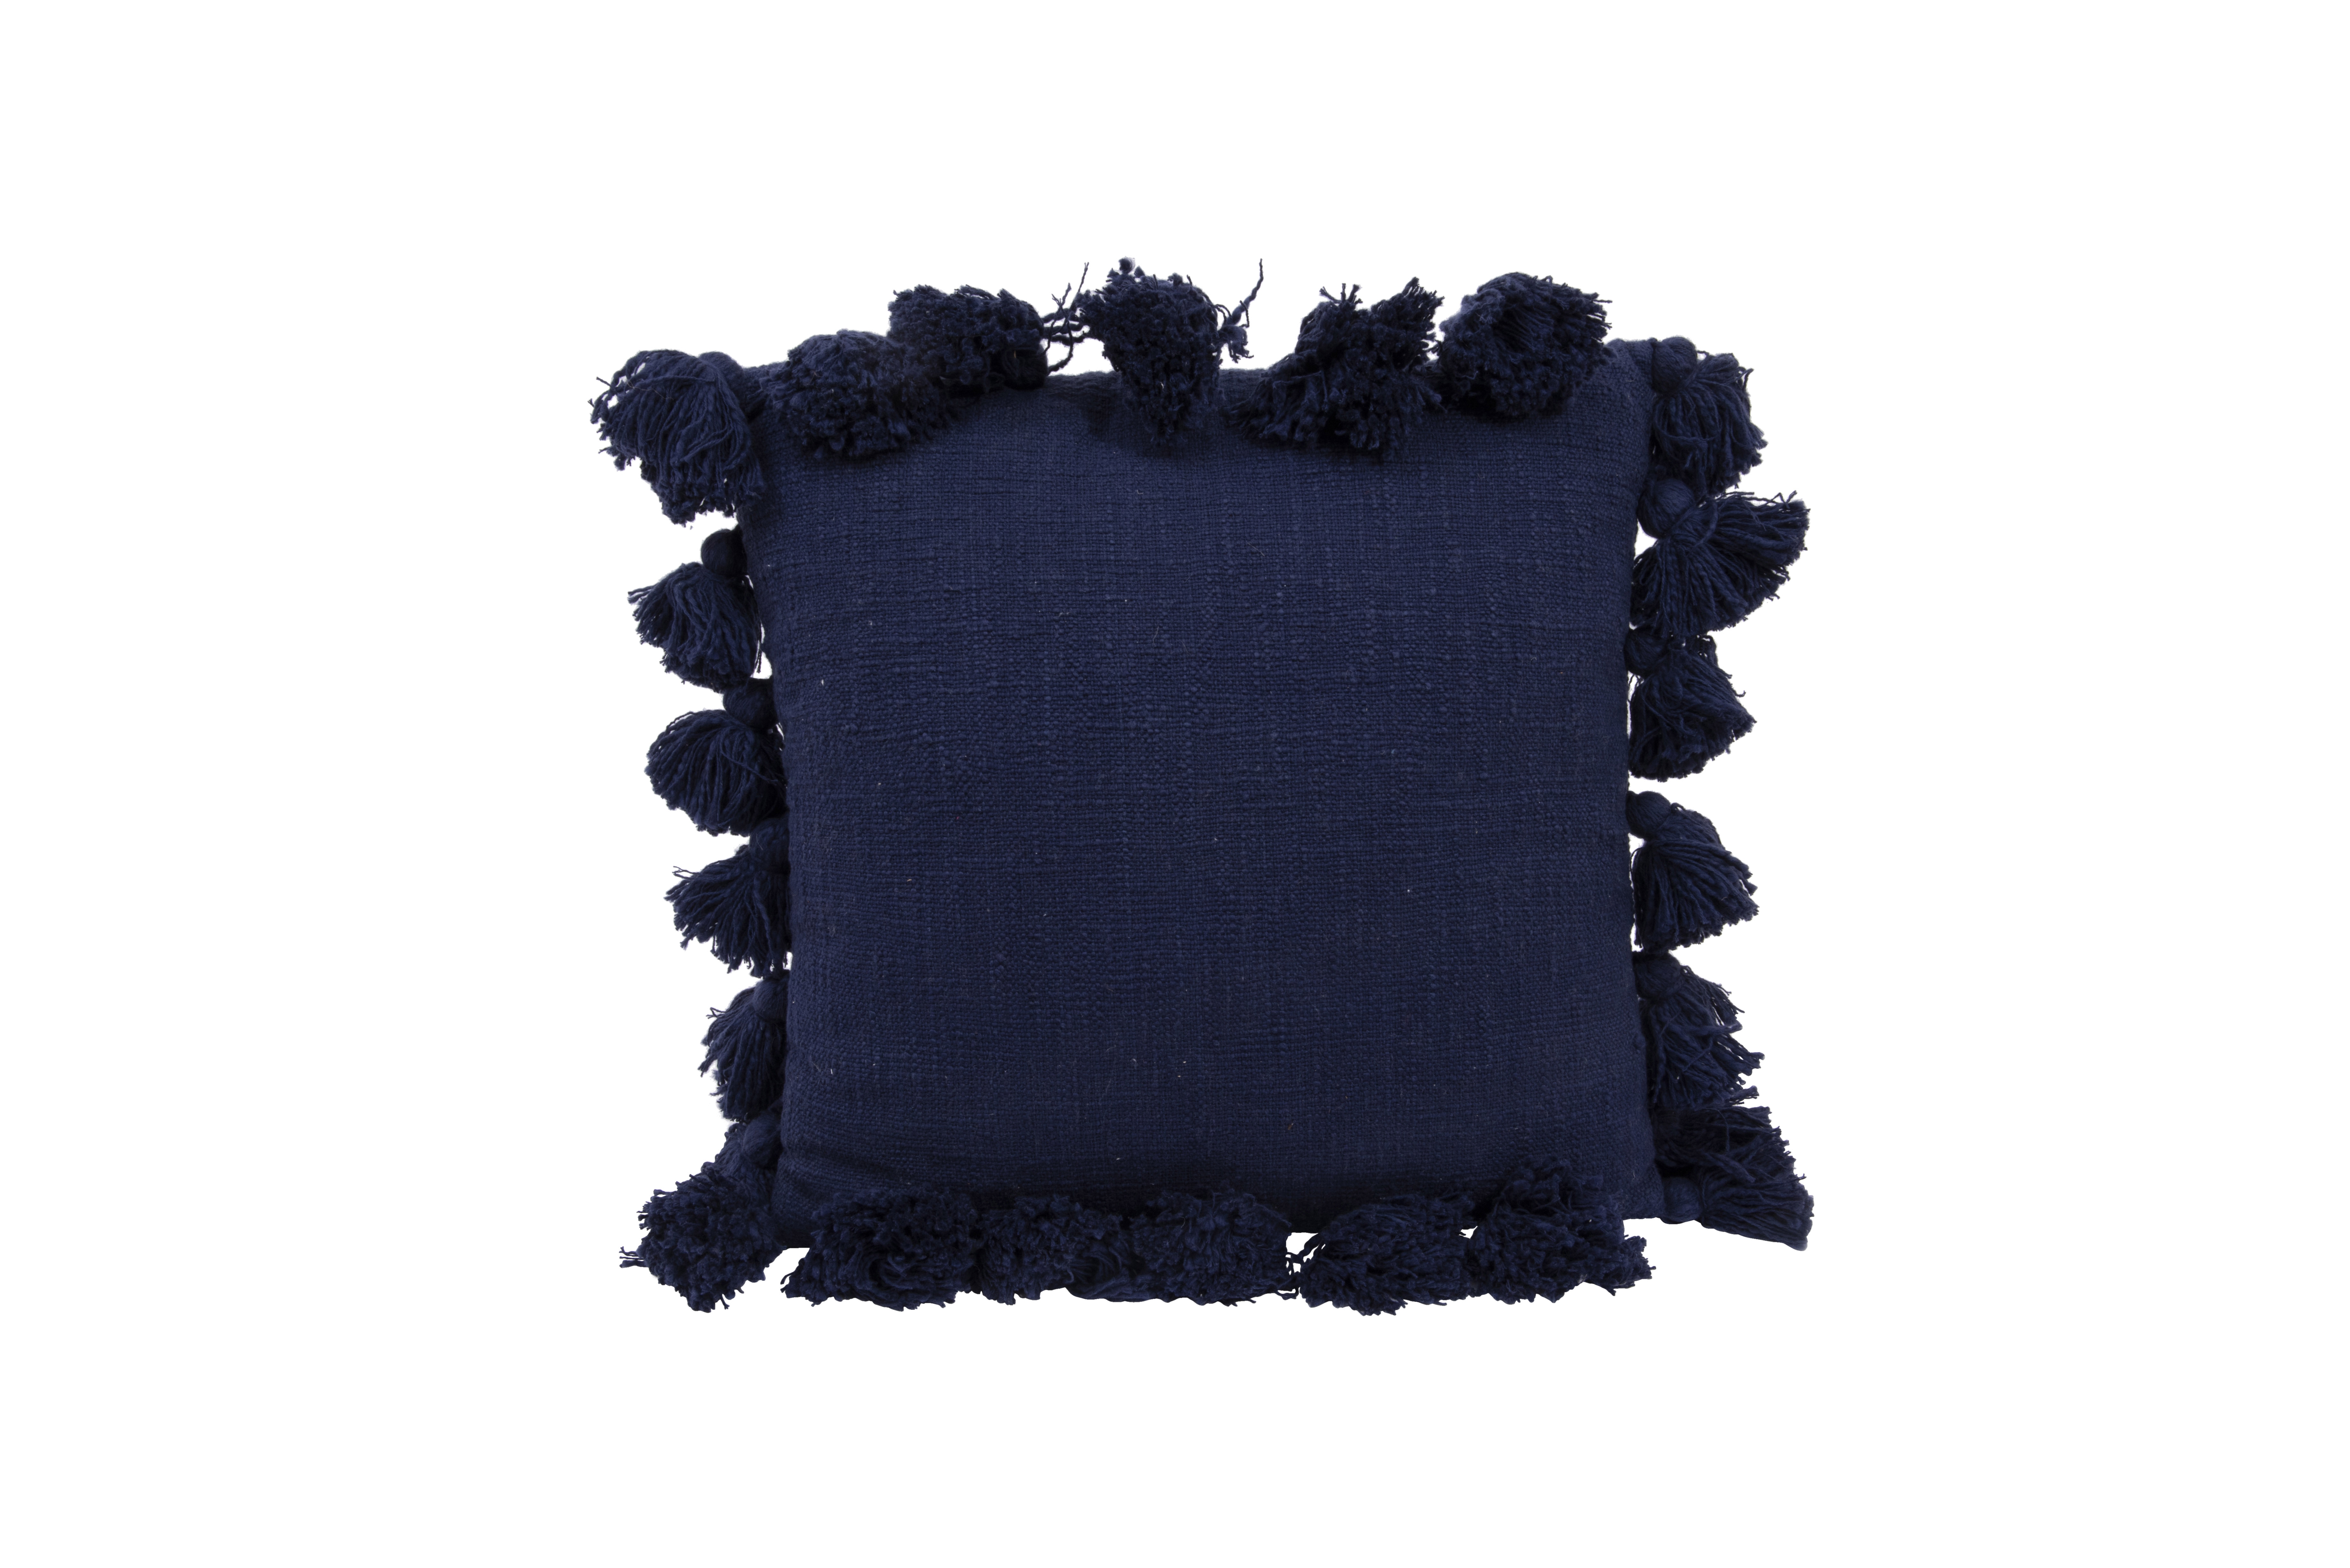 Square Cotton Pillow with Tassels, Navy Blue, 18" x 18" - Image 0